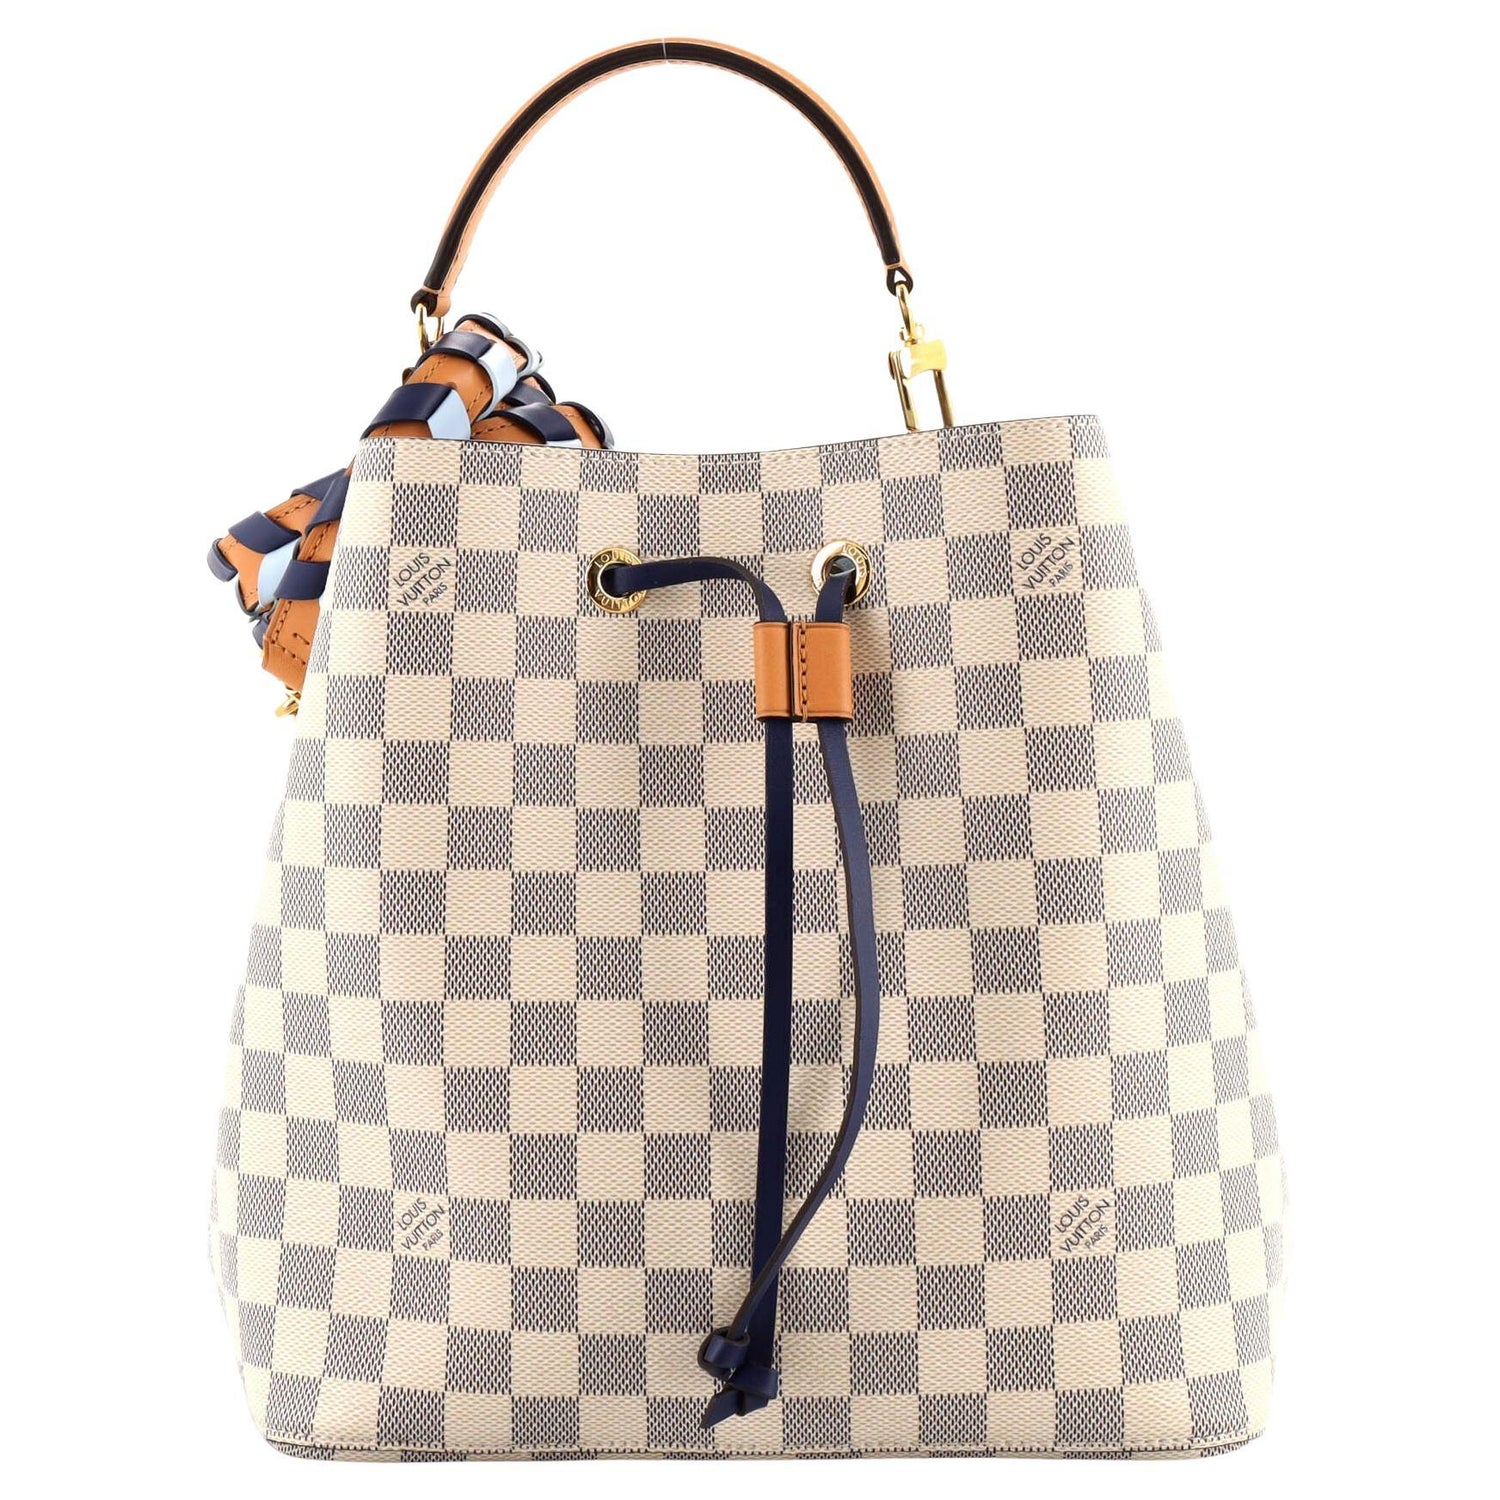 USED Louis Vuitton Damier Azur Canvas with Braided Handle NeoNoe